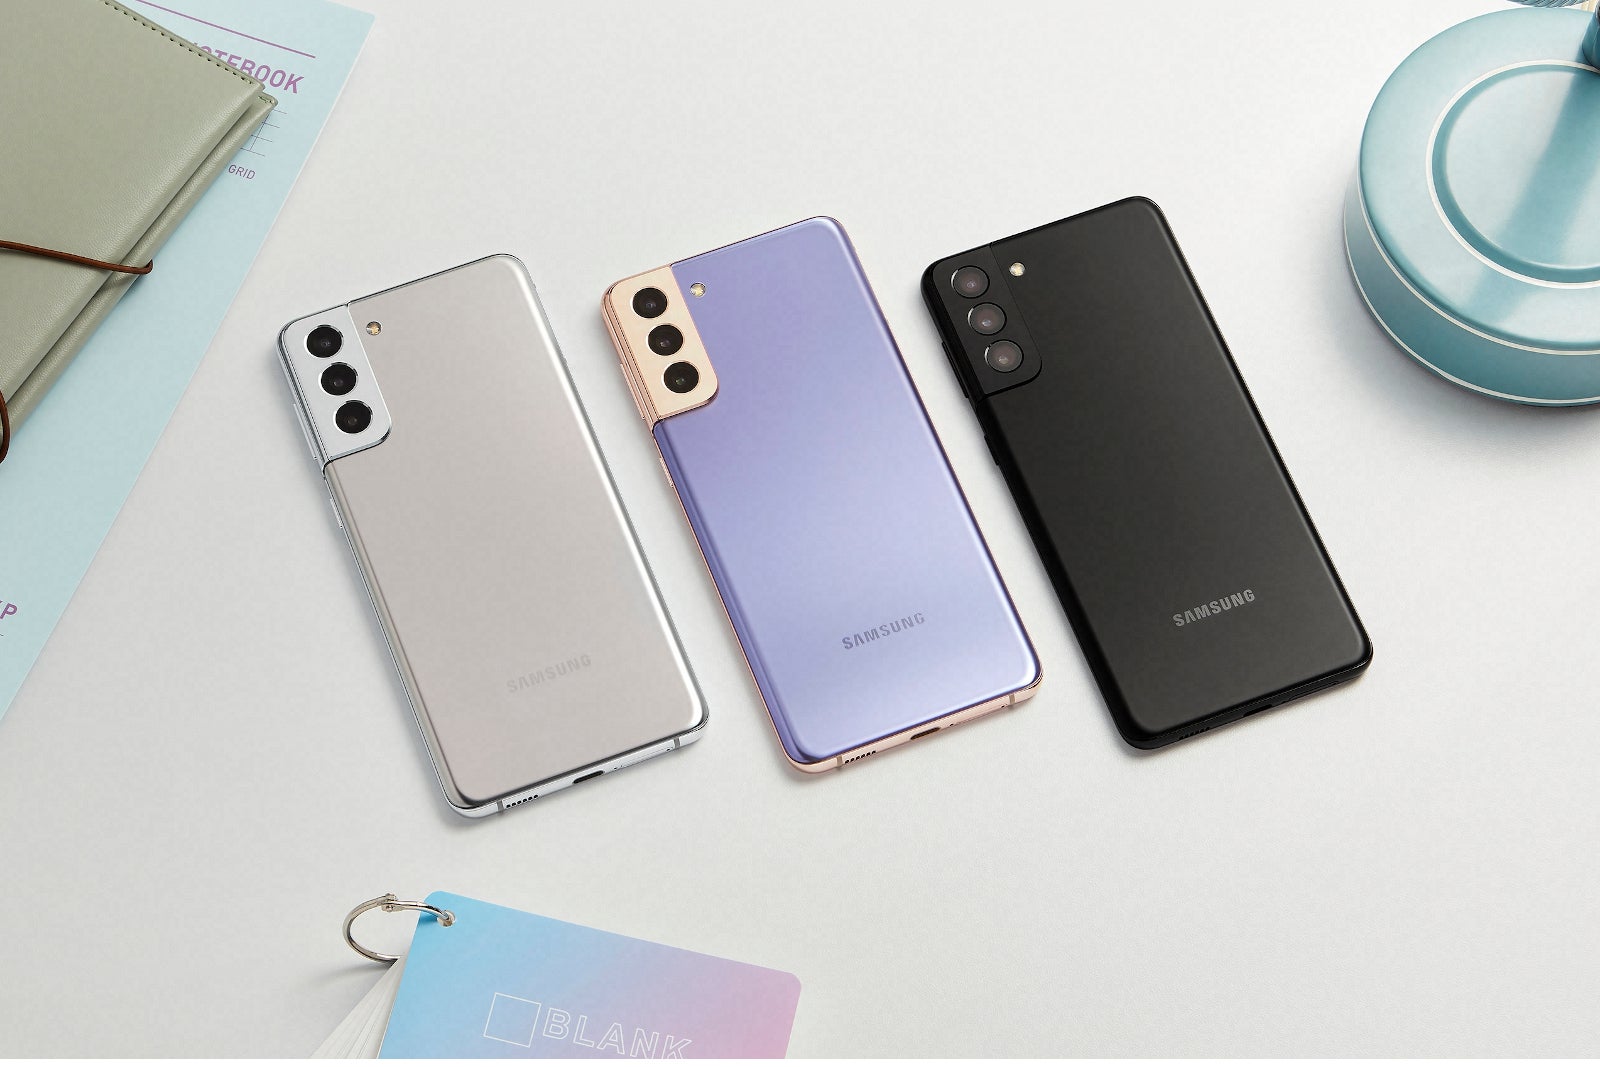 The best AT&T deals right now - updated August 2022